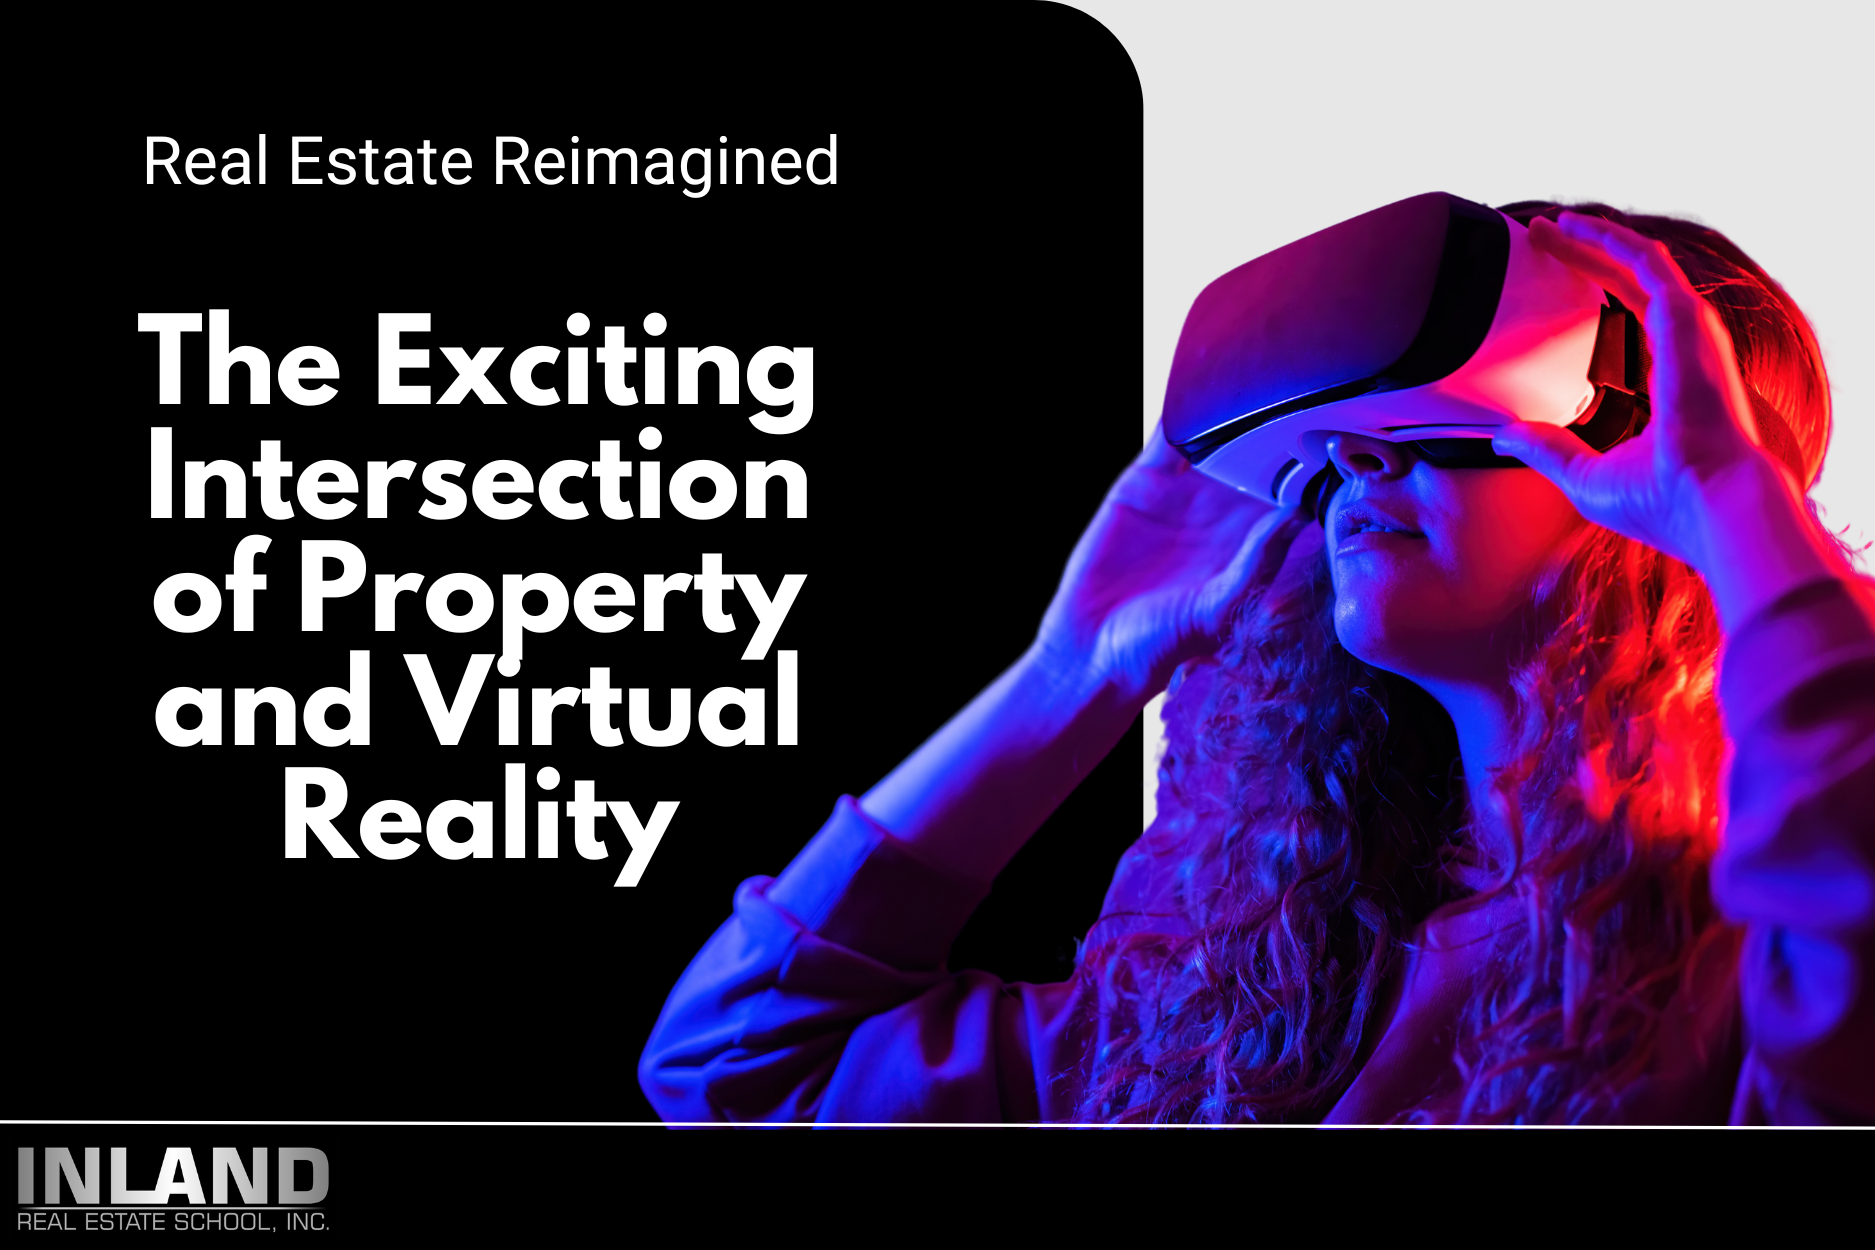 Real Estate Reimagined: The Exciting Intersection of Property and Virtual Reality